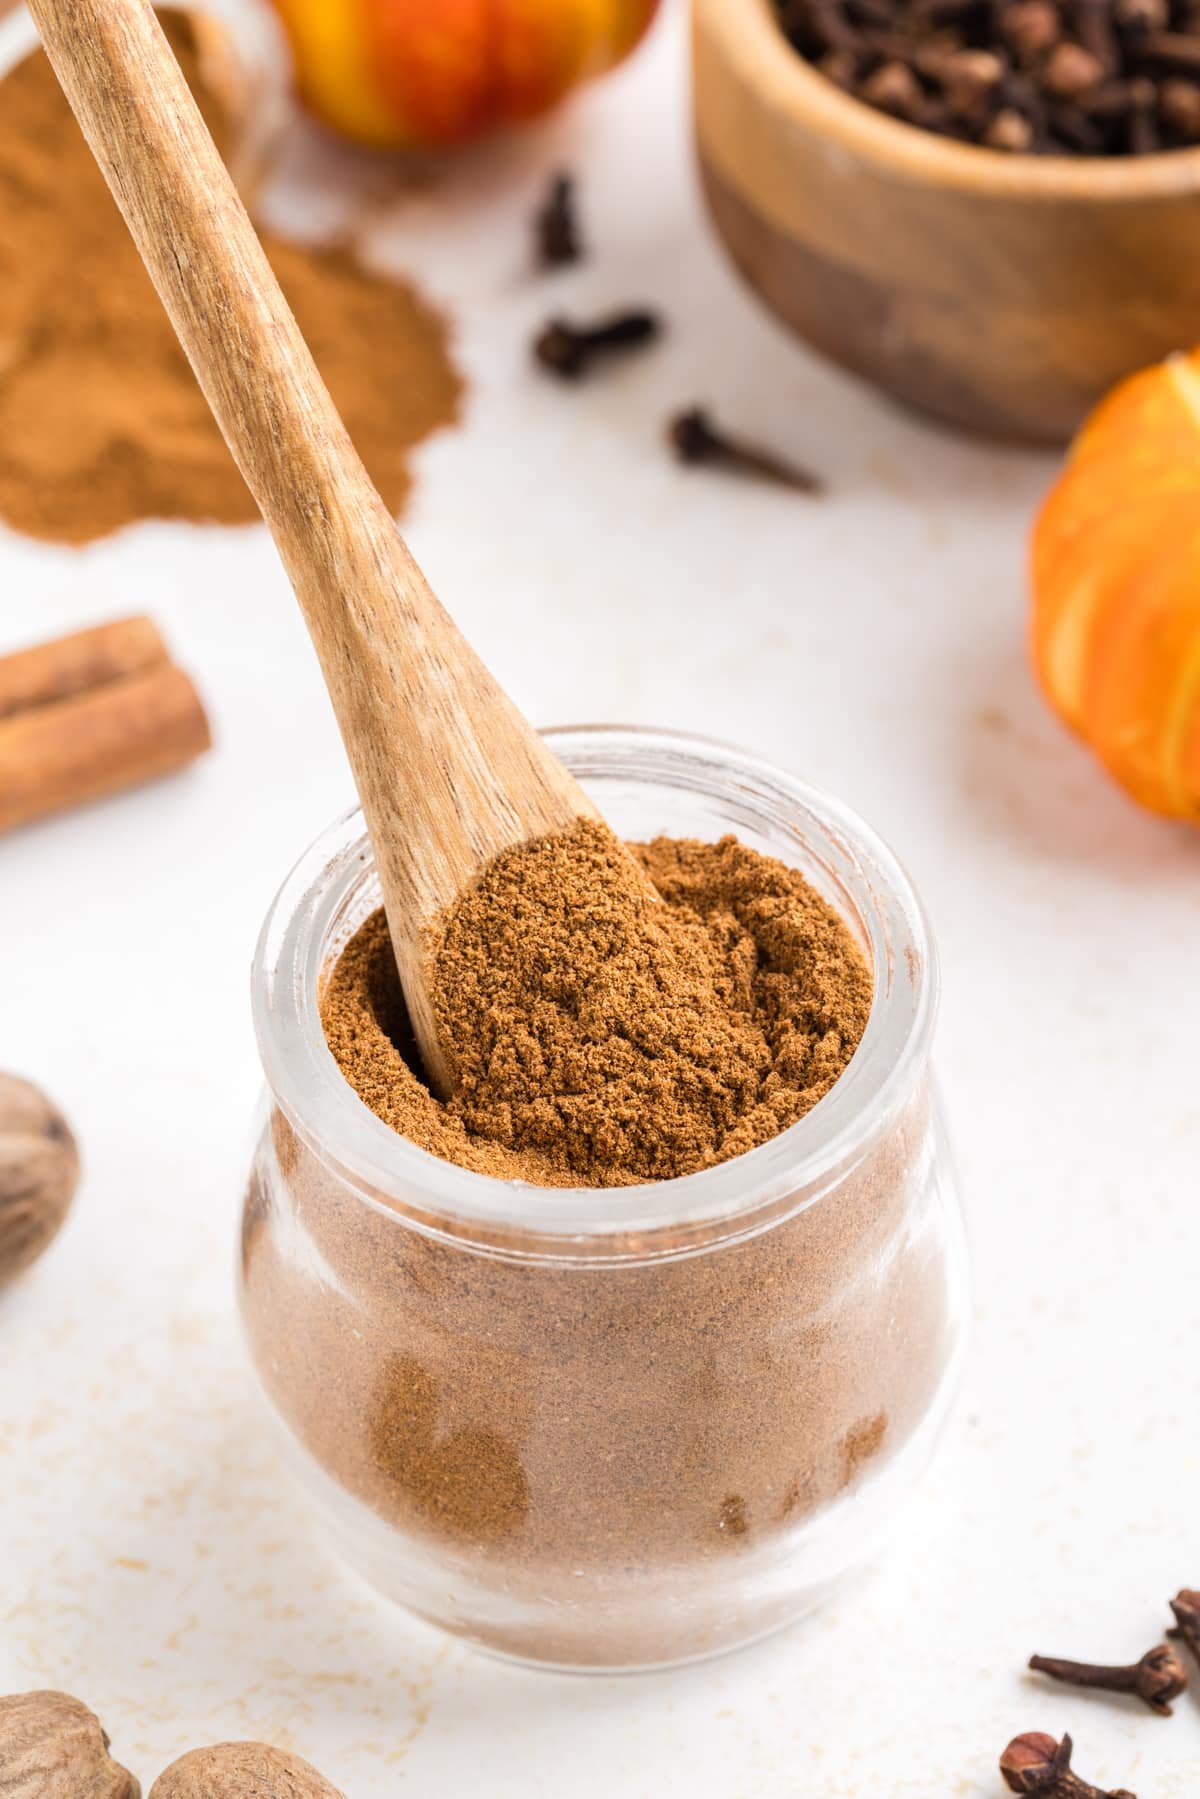 A small wooden spoon taking a portion of pumpkin spice from a small jar.